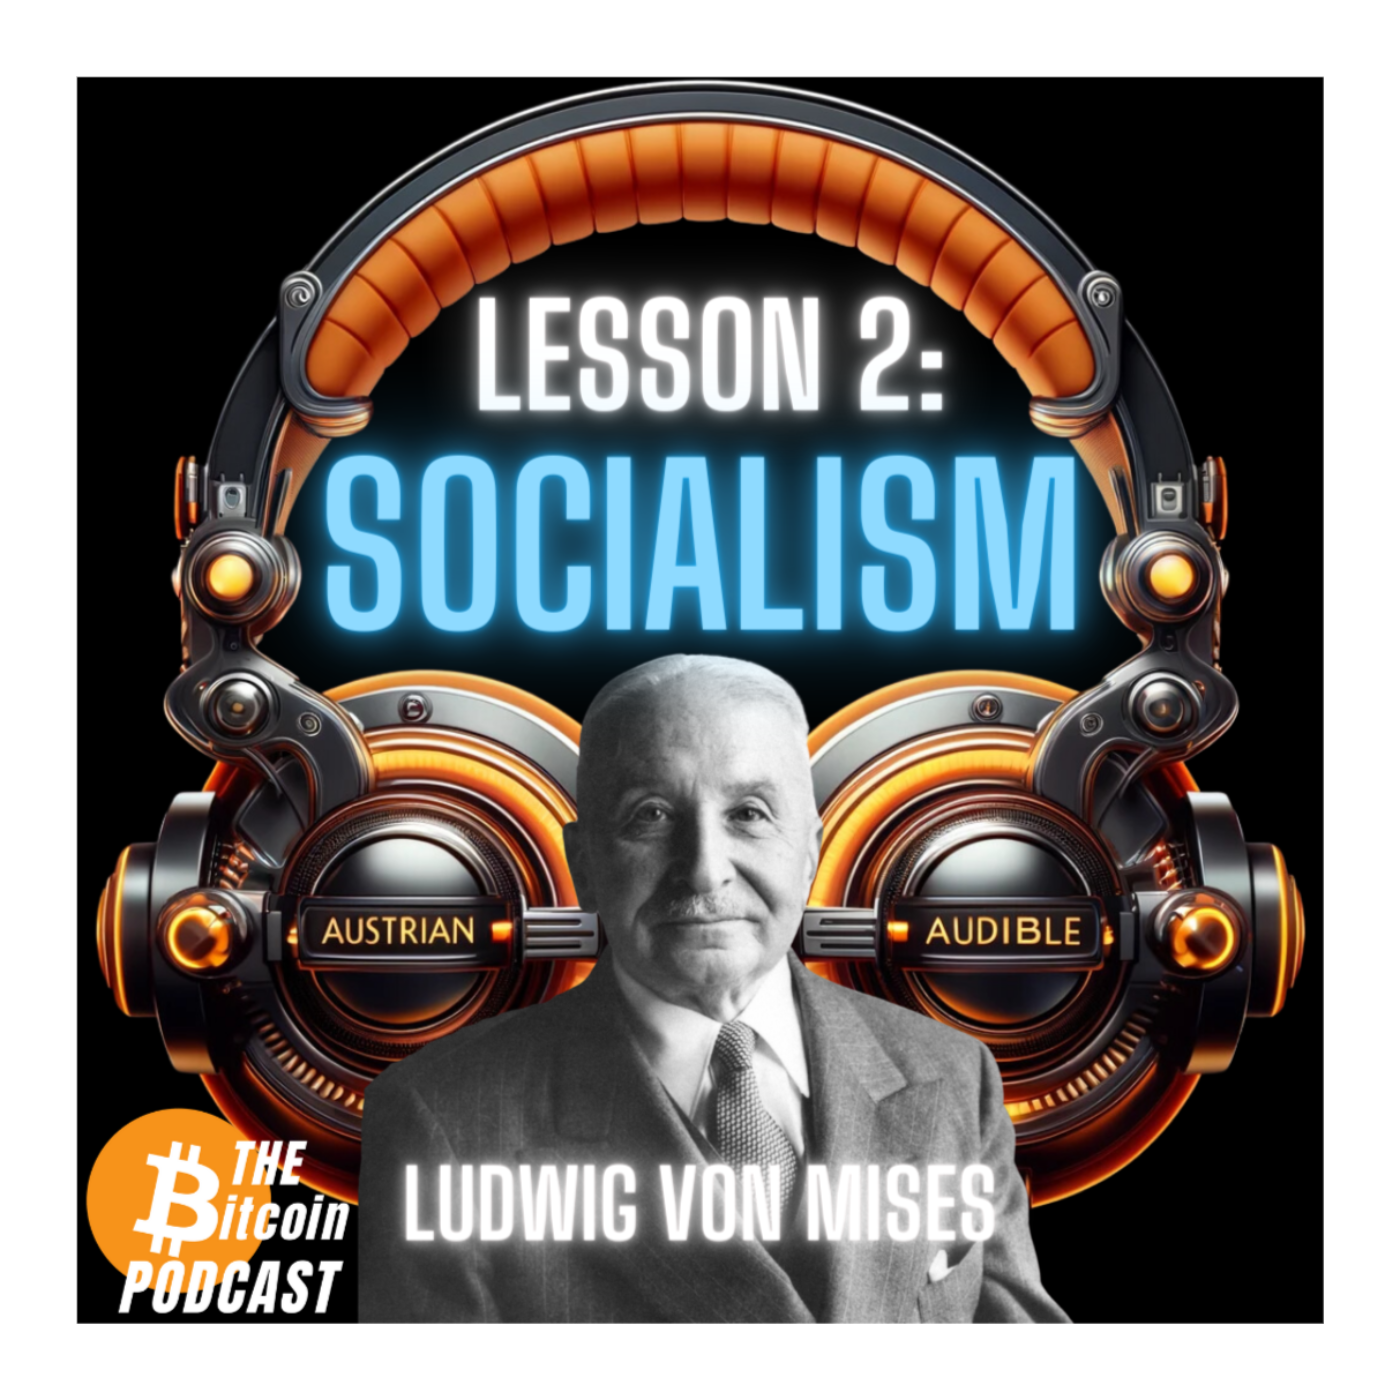 MISES' SIX LESSONS: #2 - SOCIALISM (Austrian Audible on THE Bitcoin Podcast)